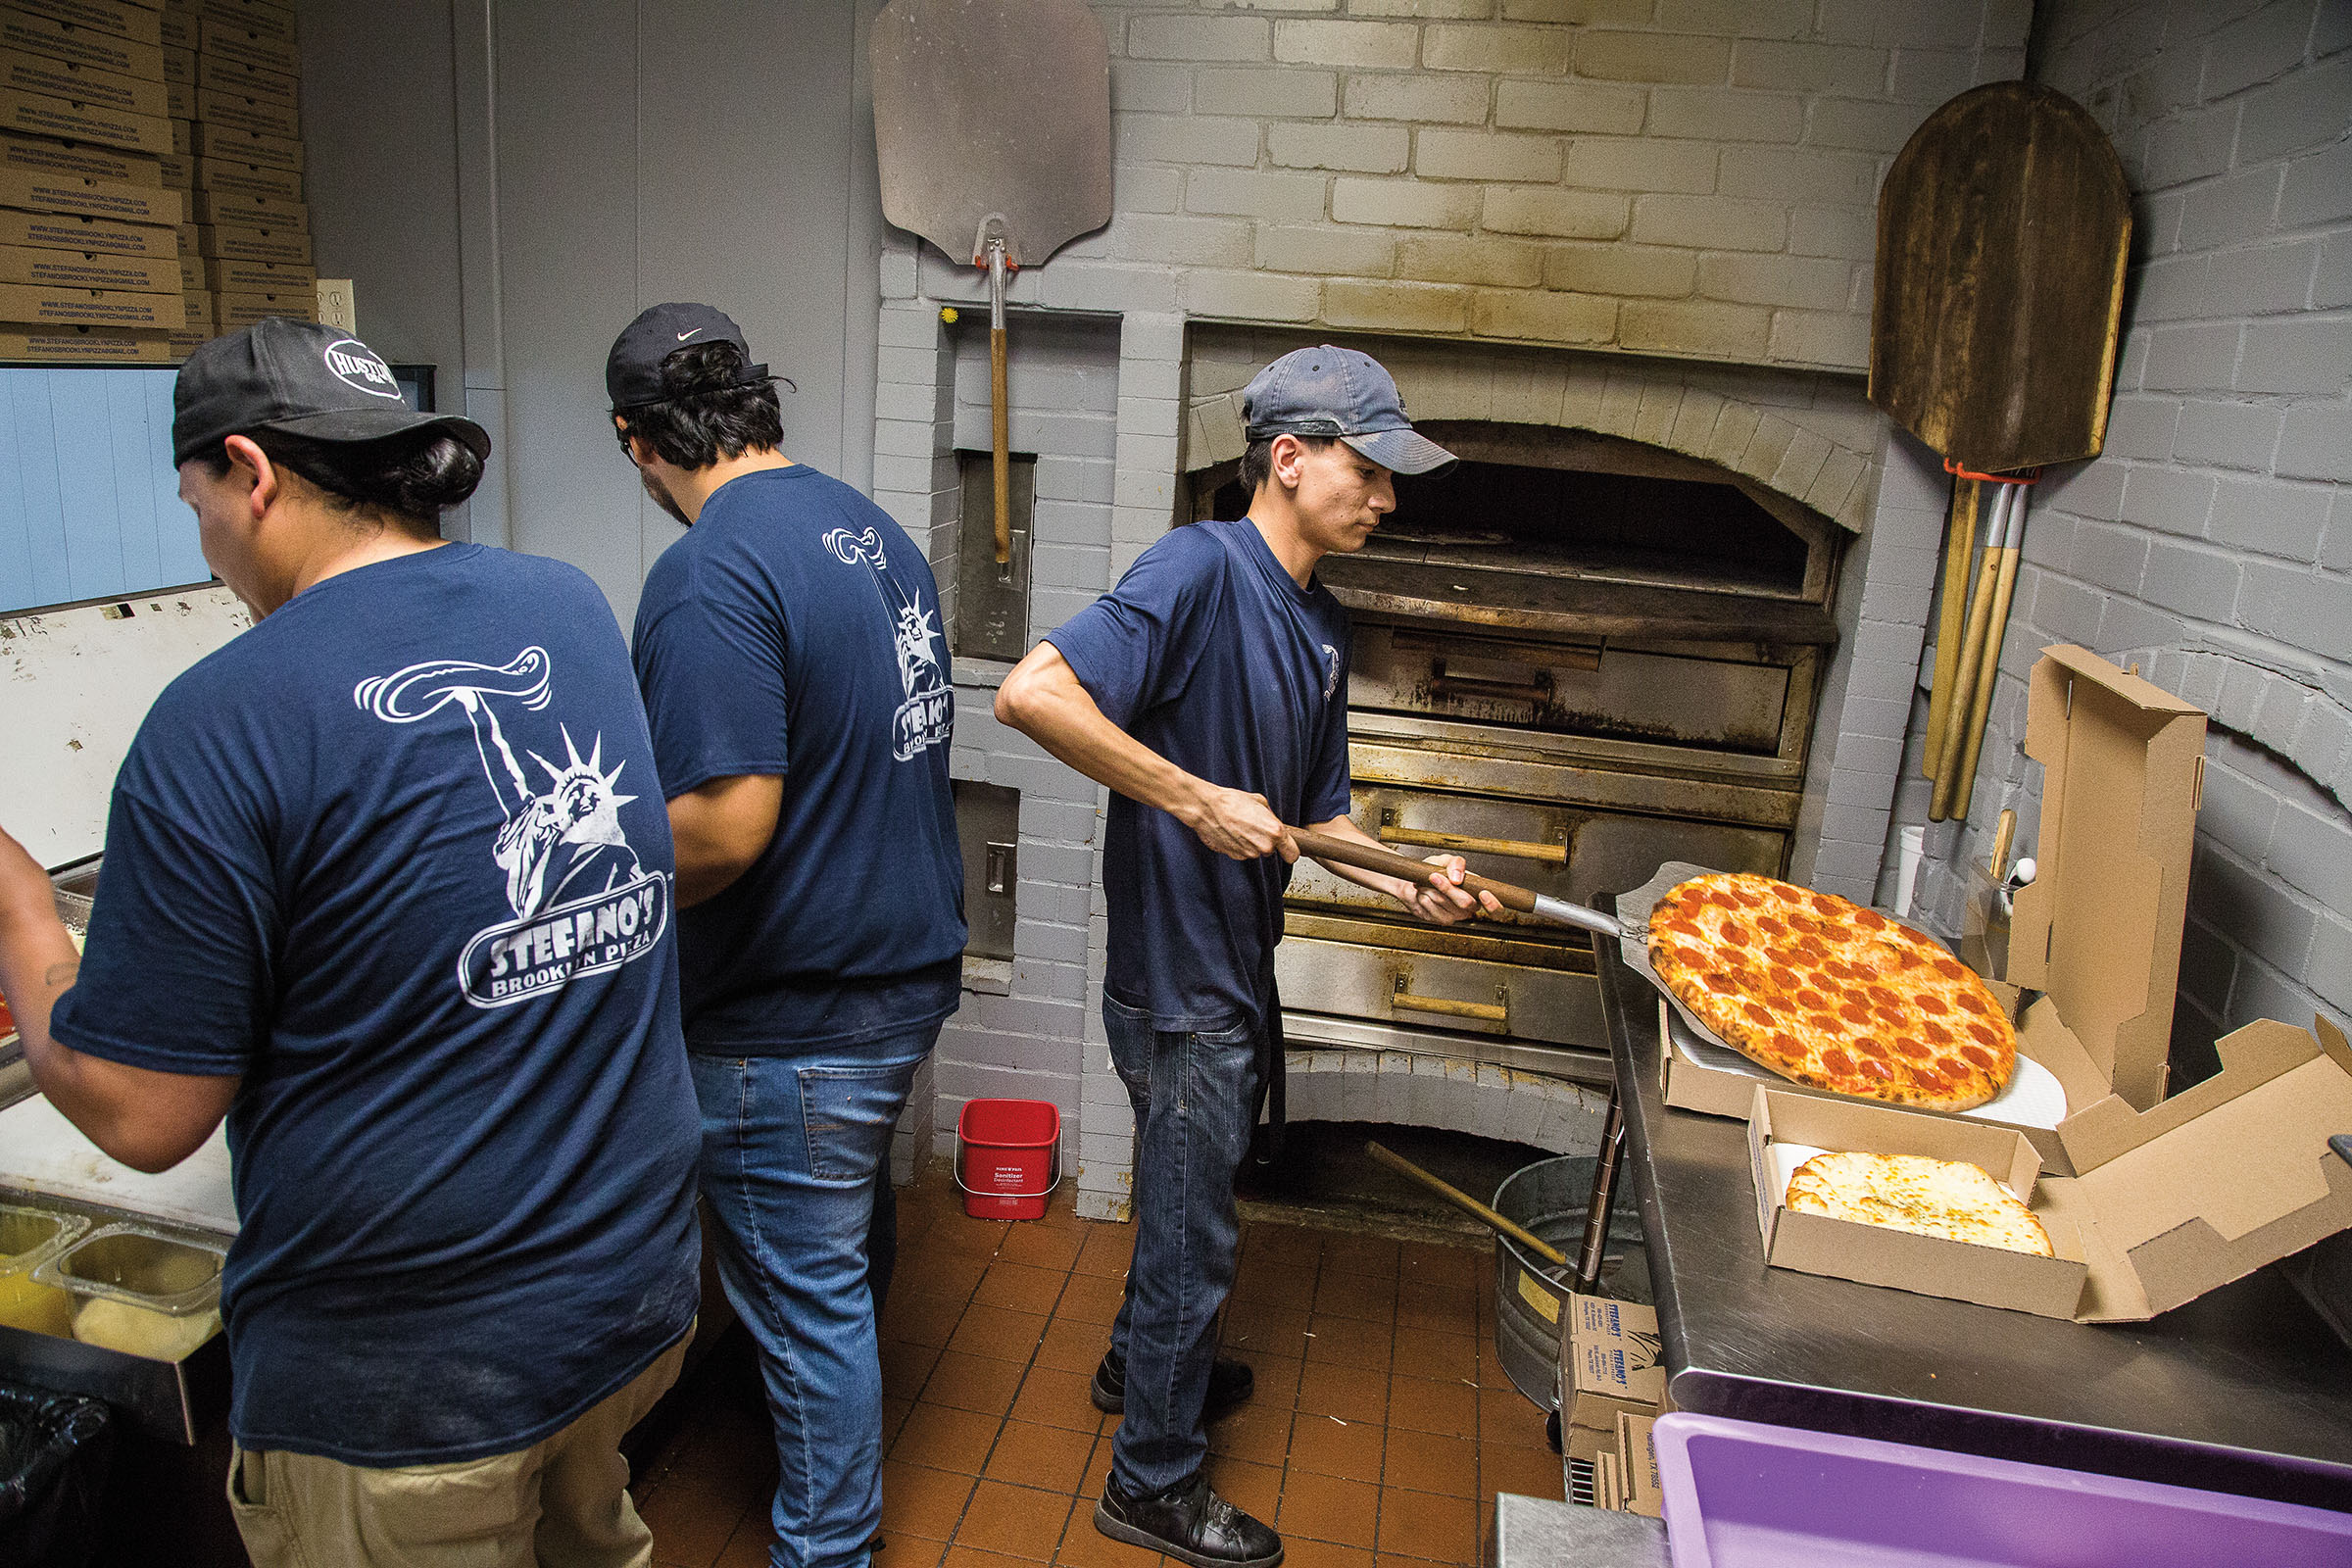 An employee takes a pizza off of a peel in front of a large oven while other employees look nearby